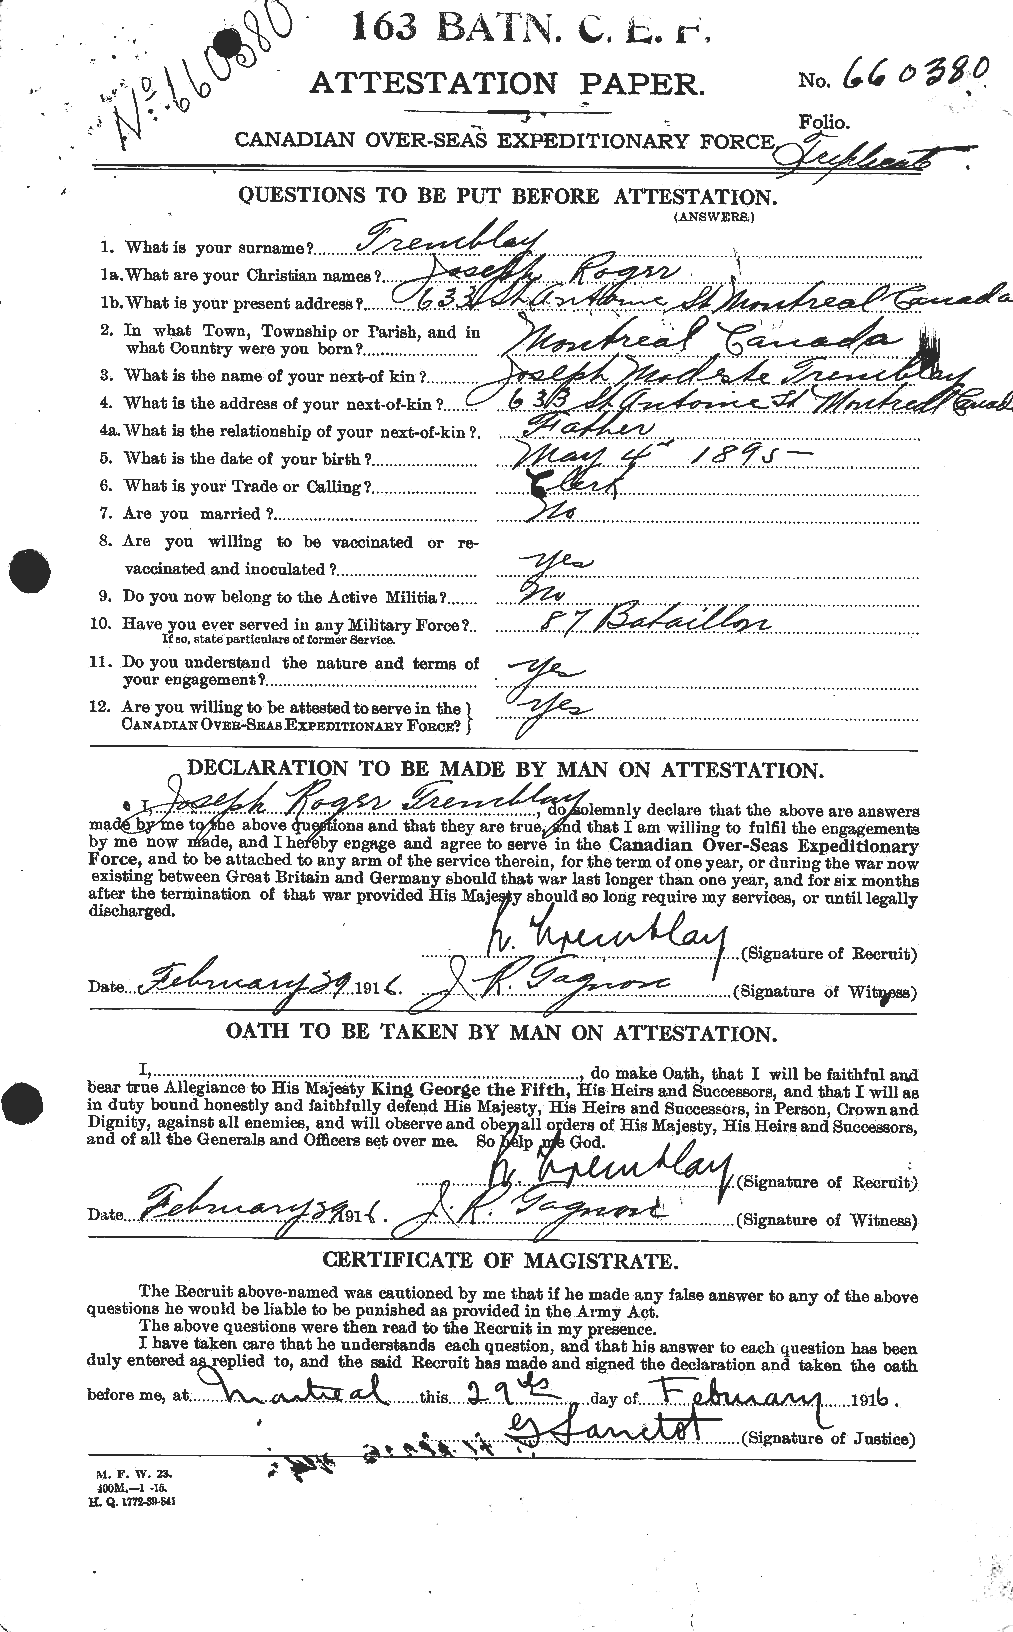 Personnel Records of the First World War - CEF 639169a